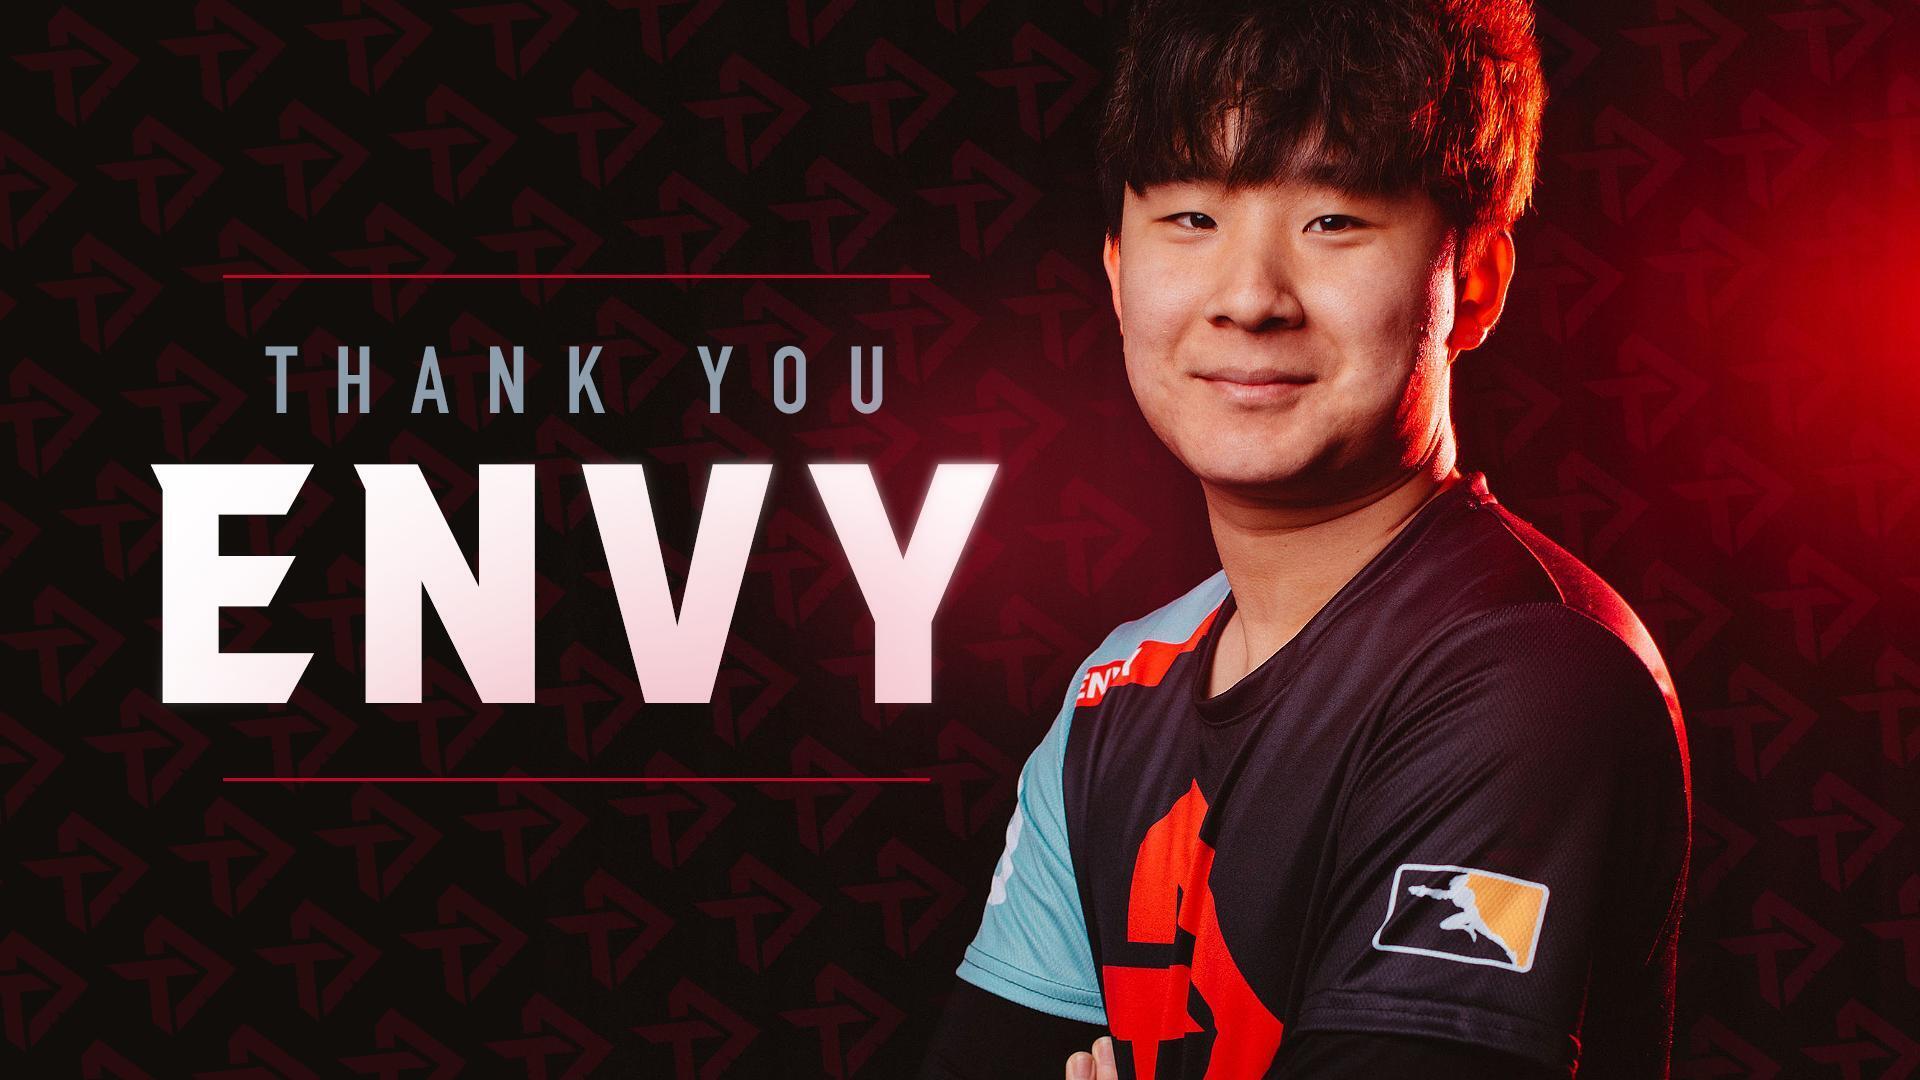 The Shanghai Dragons will be Envy's third Overwatch League team of his career .(Image courtesy of Toronto Defiant)